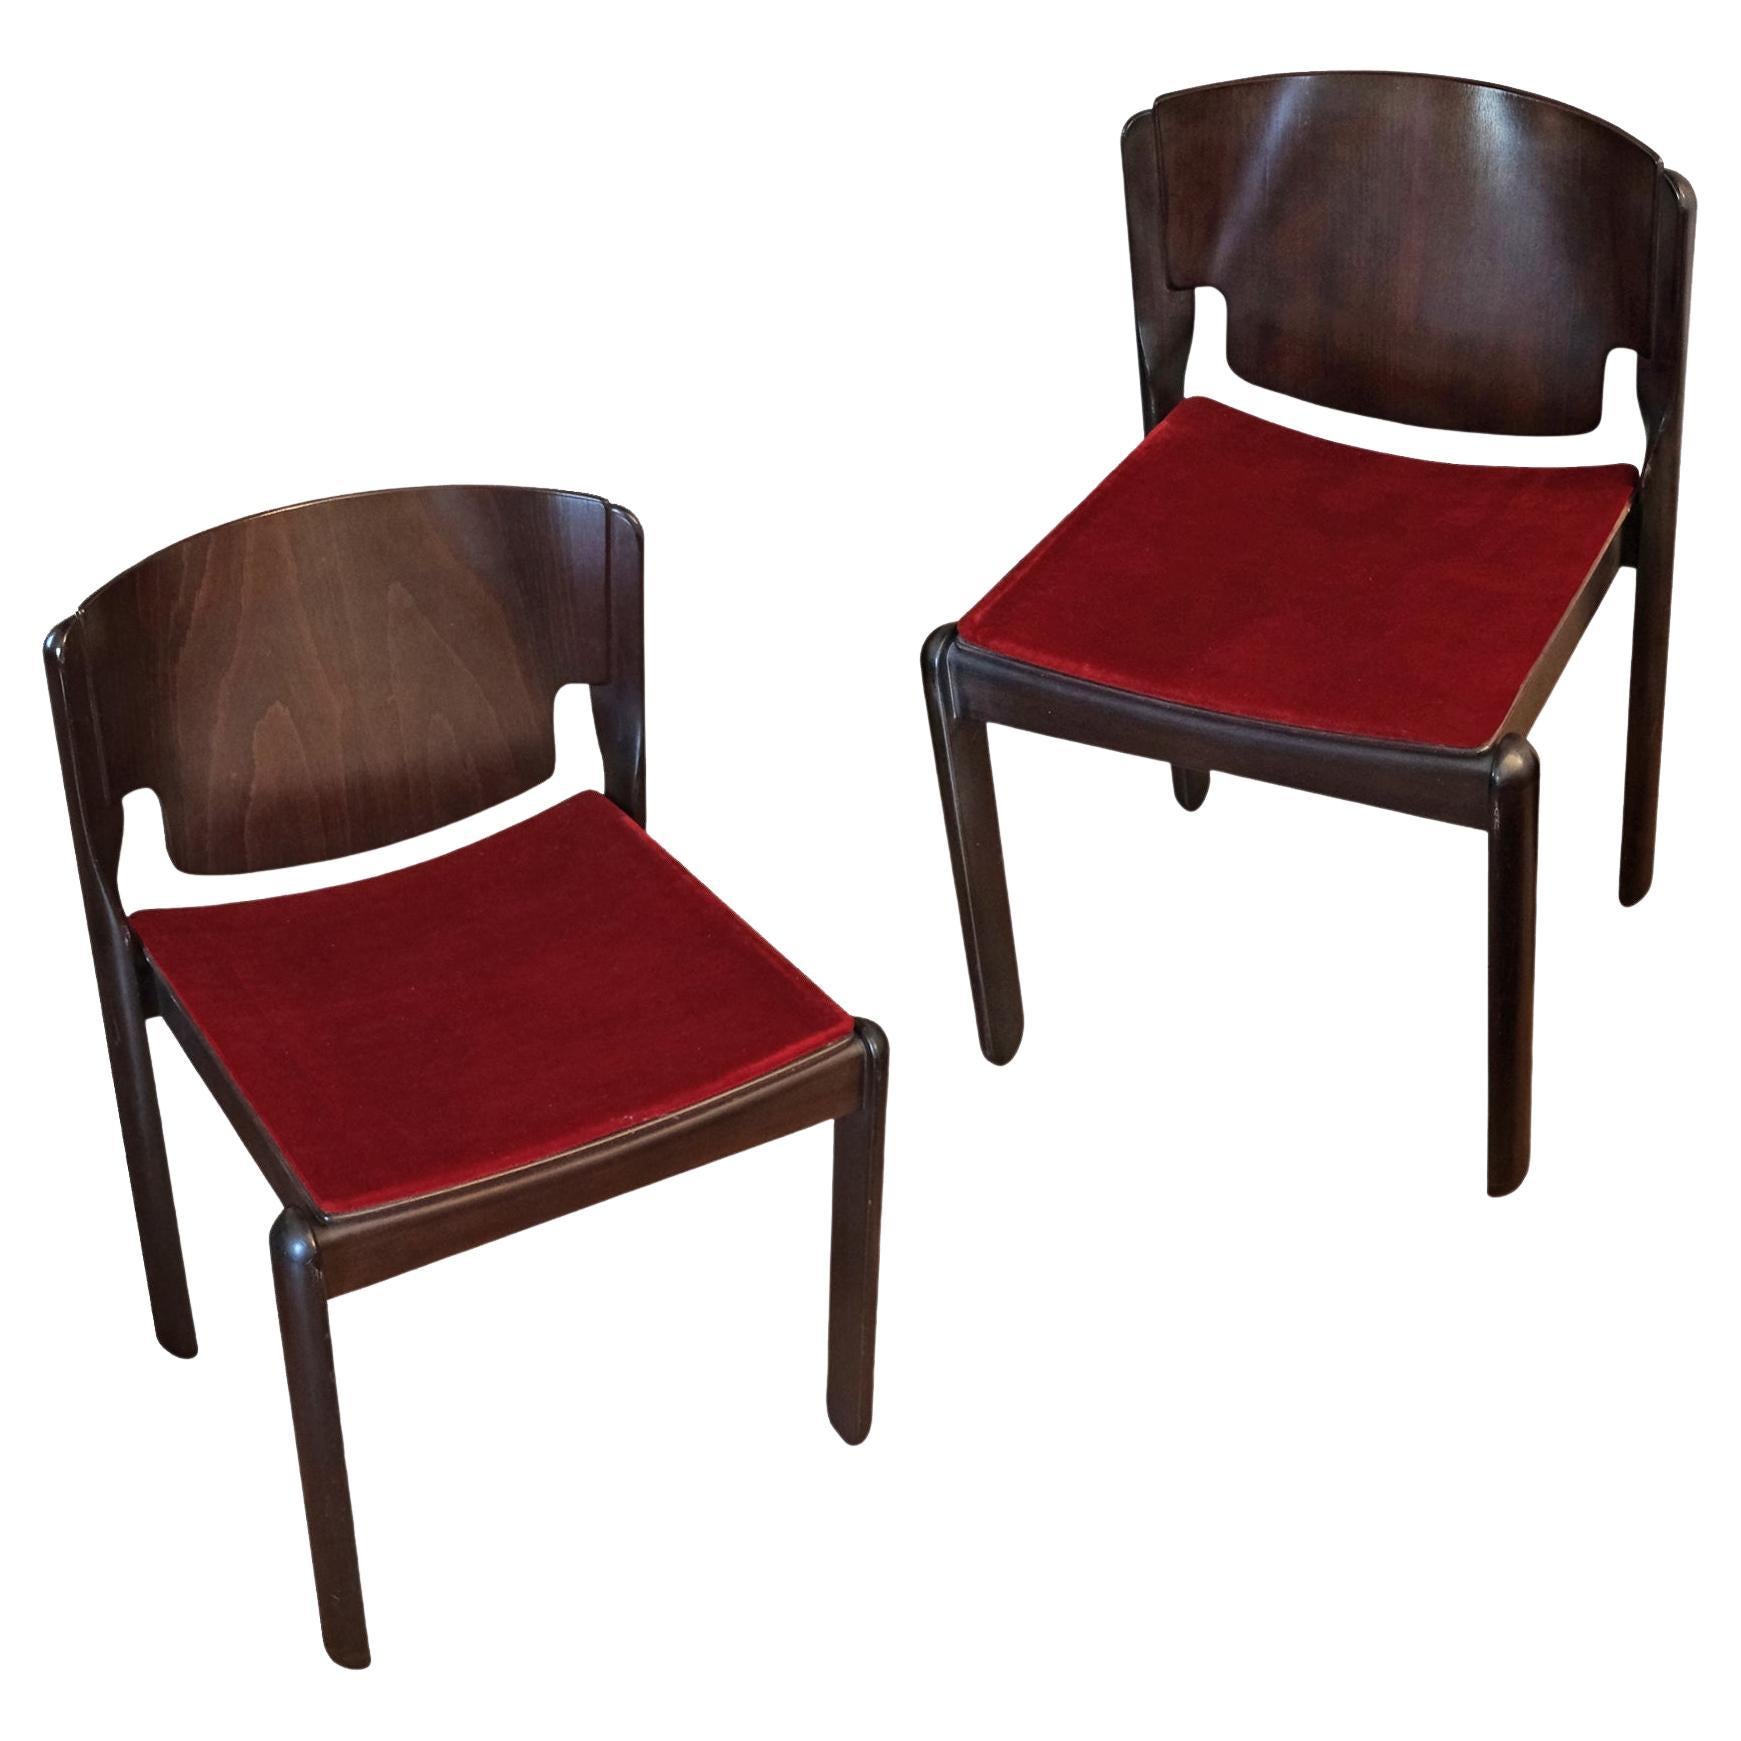 Vico Magistretti, a Pair of Chairs, Model 122, Cassina, 1960s For Sale